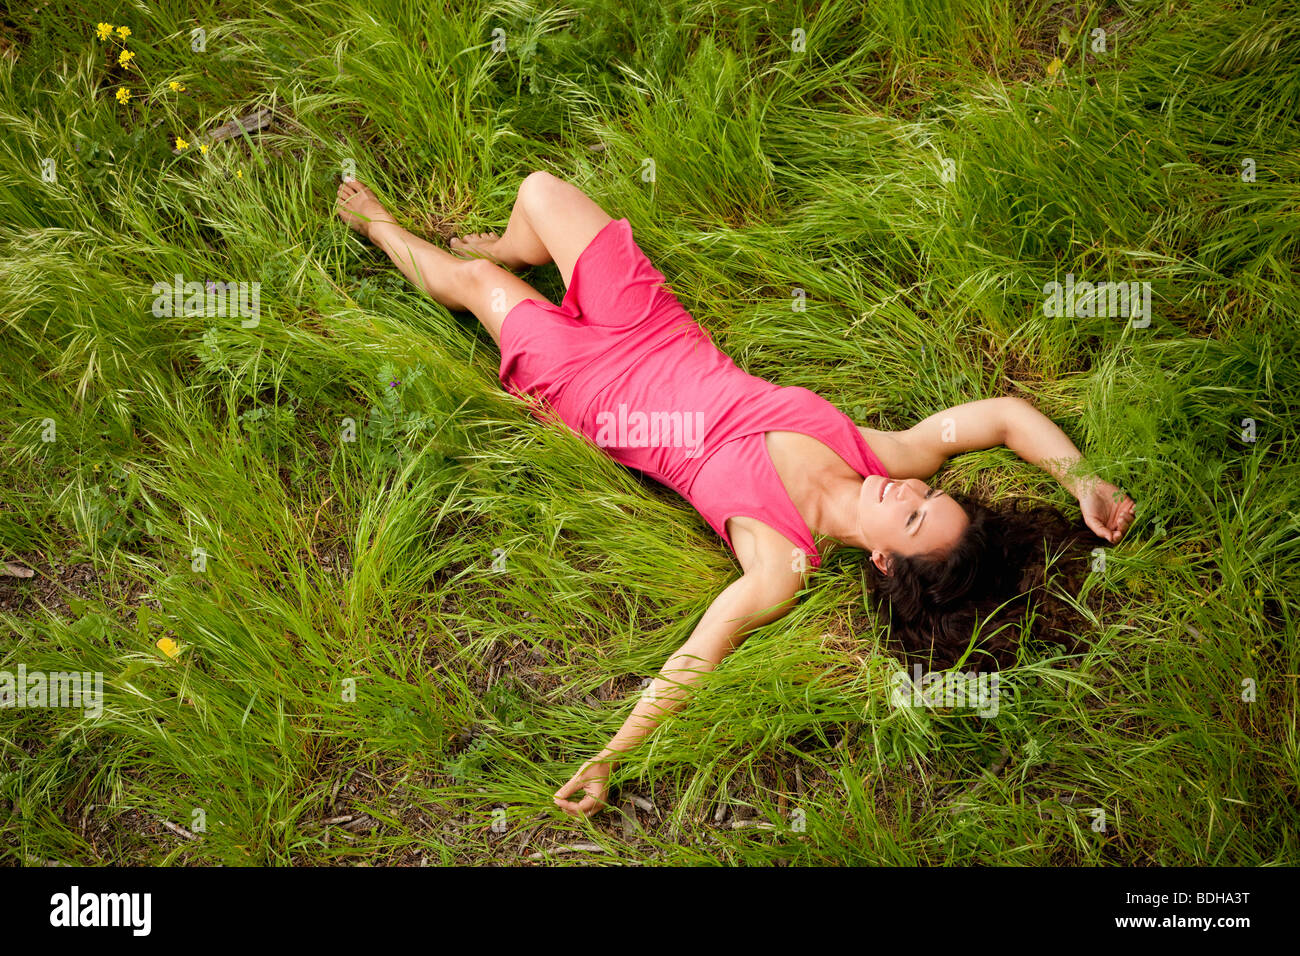 Happy young woman in a dress laying in a field of fresh grass. Stock Photo